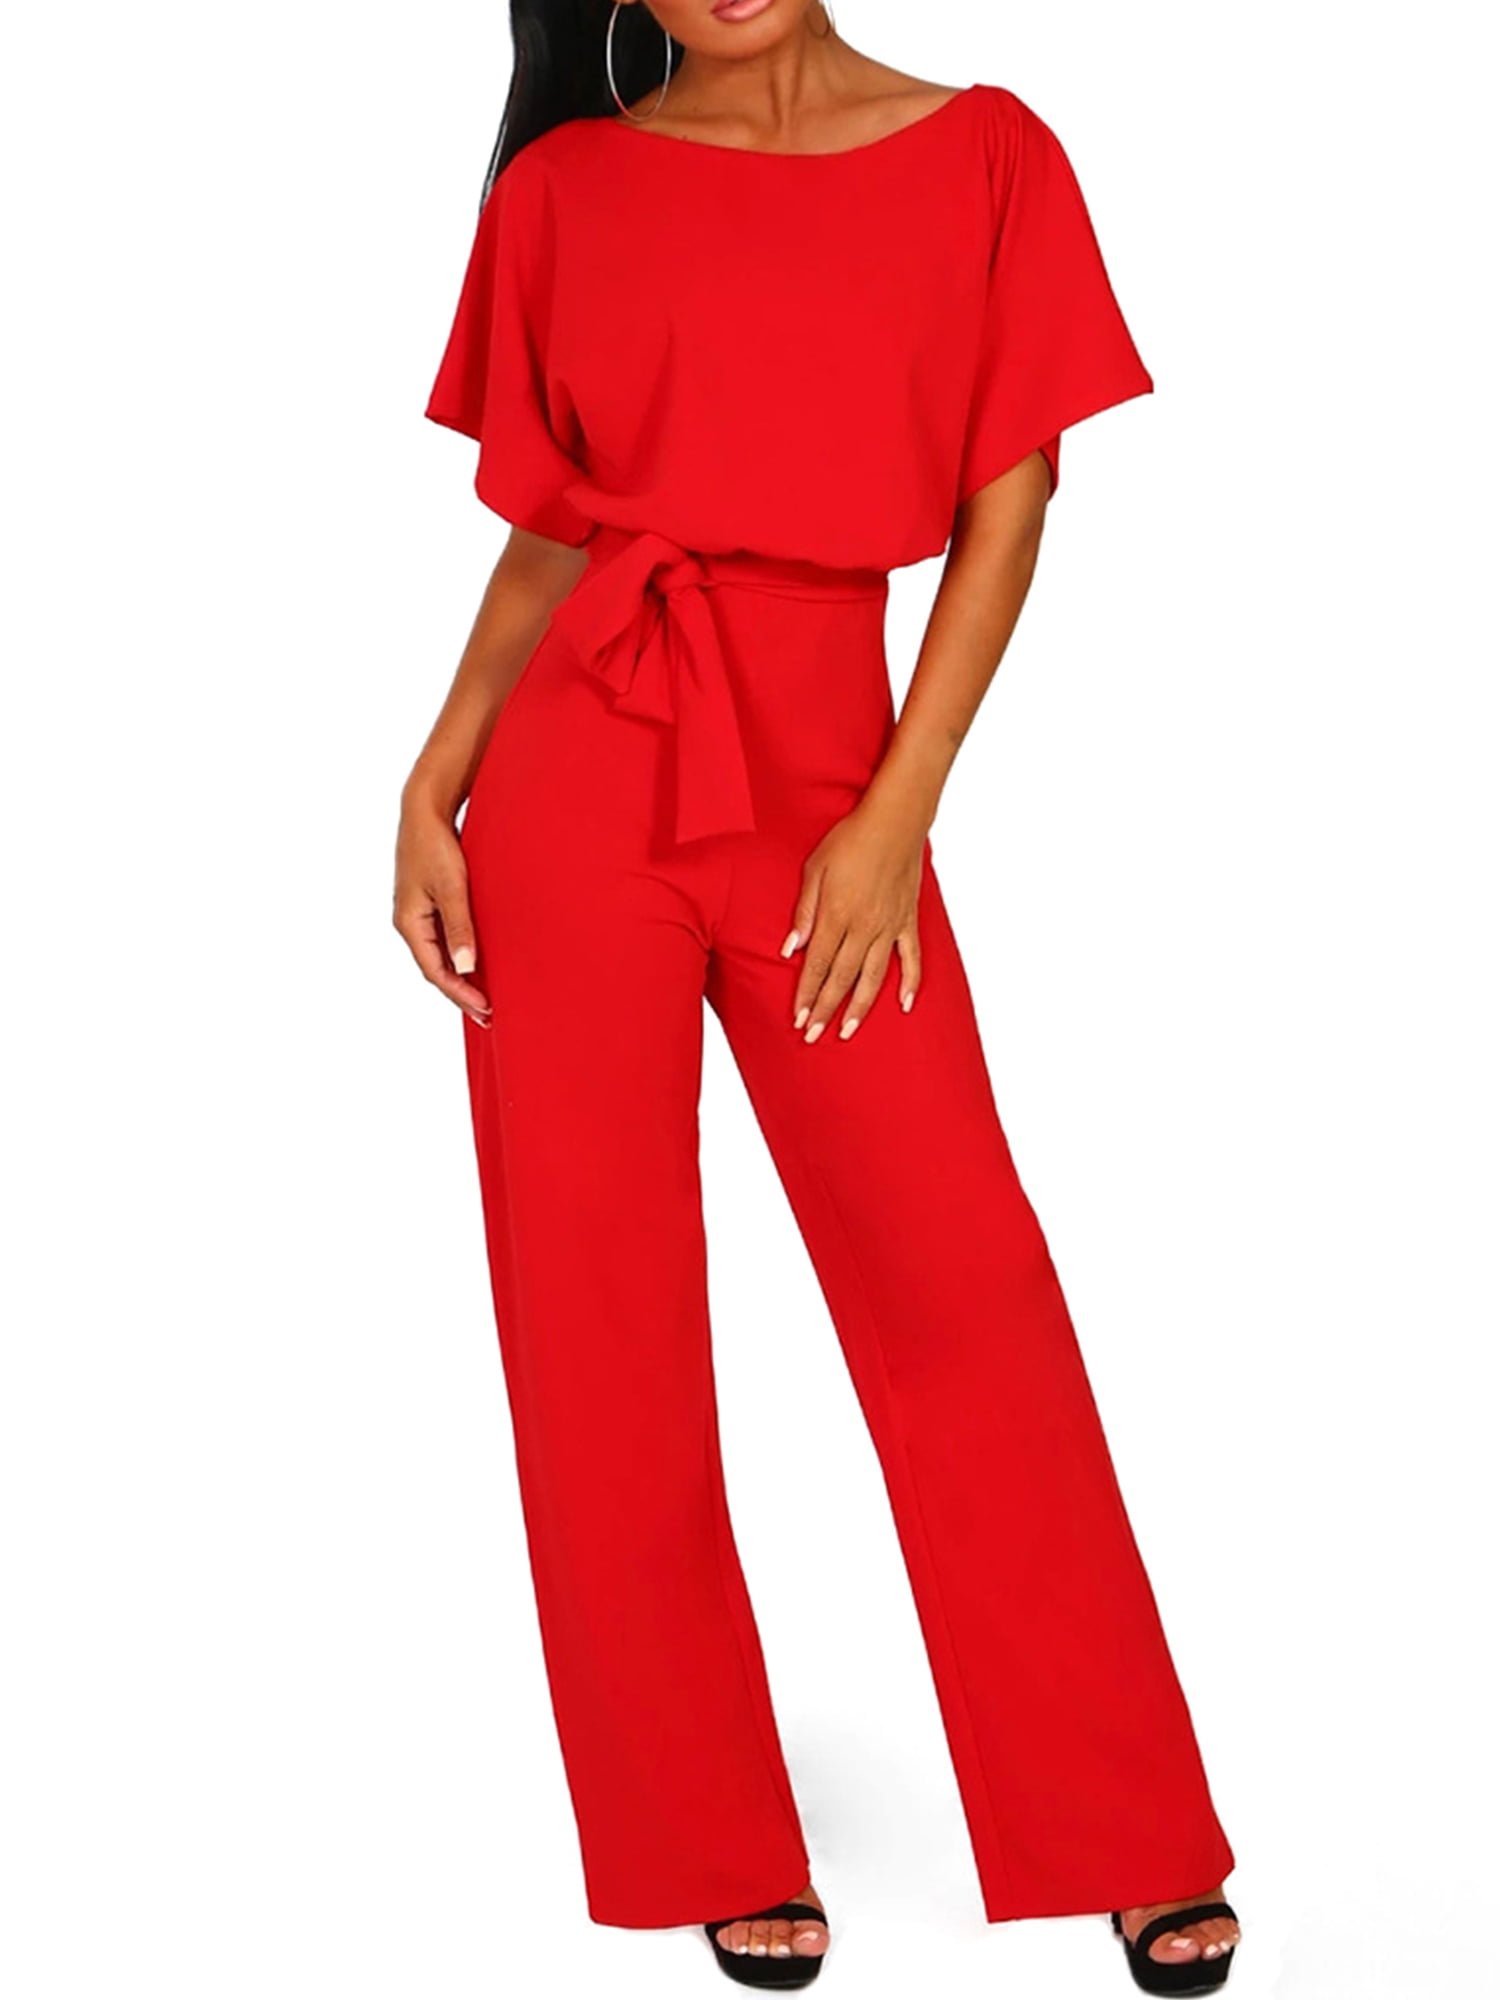 ANRABESS Womens Casual Short Sleeve Jumpsuits Elastic Waist Long Pants Rompers with Pockets 